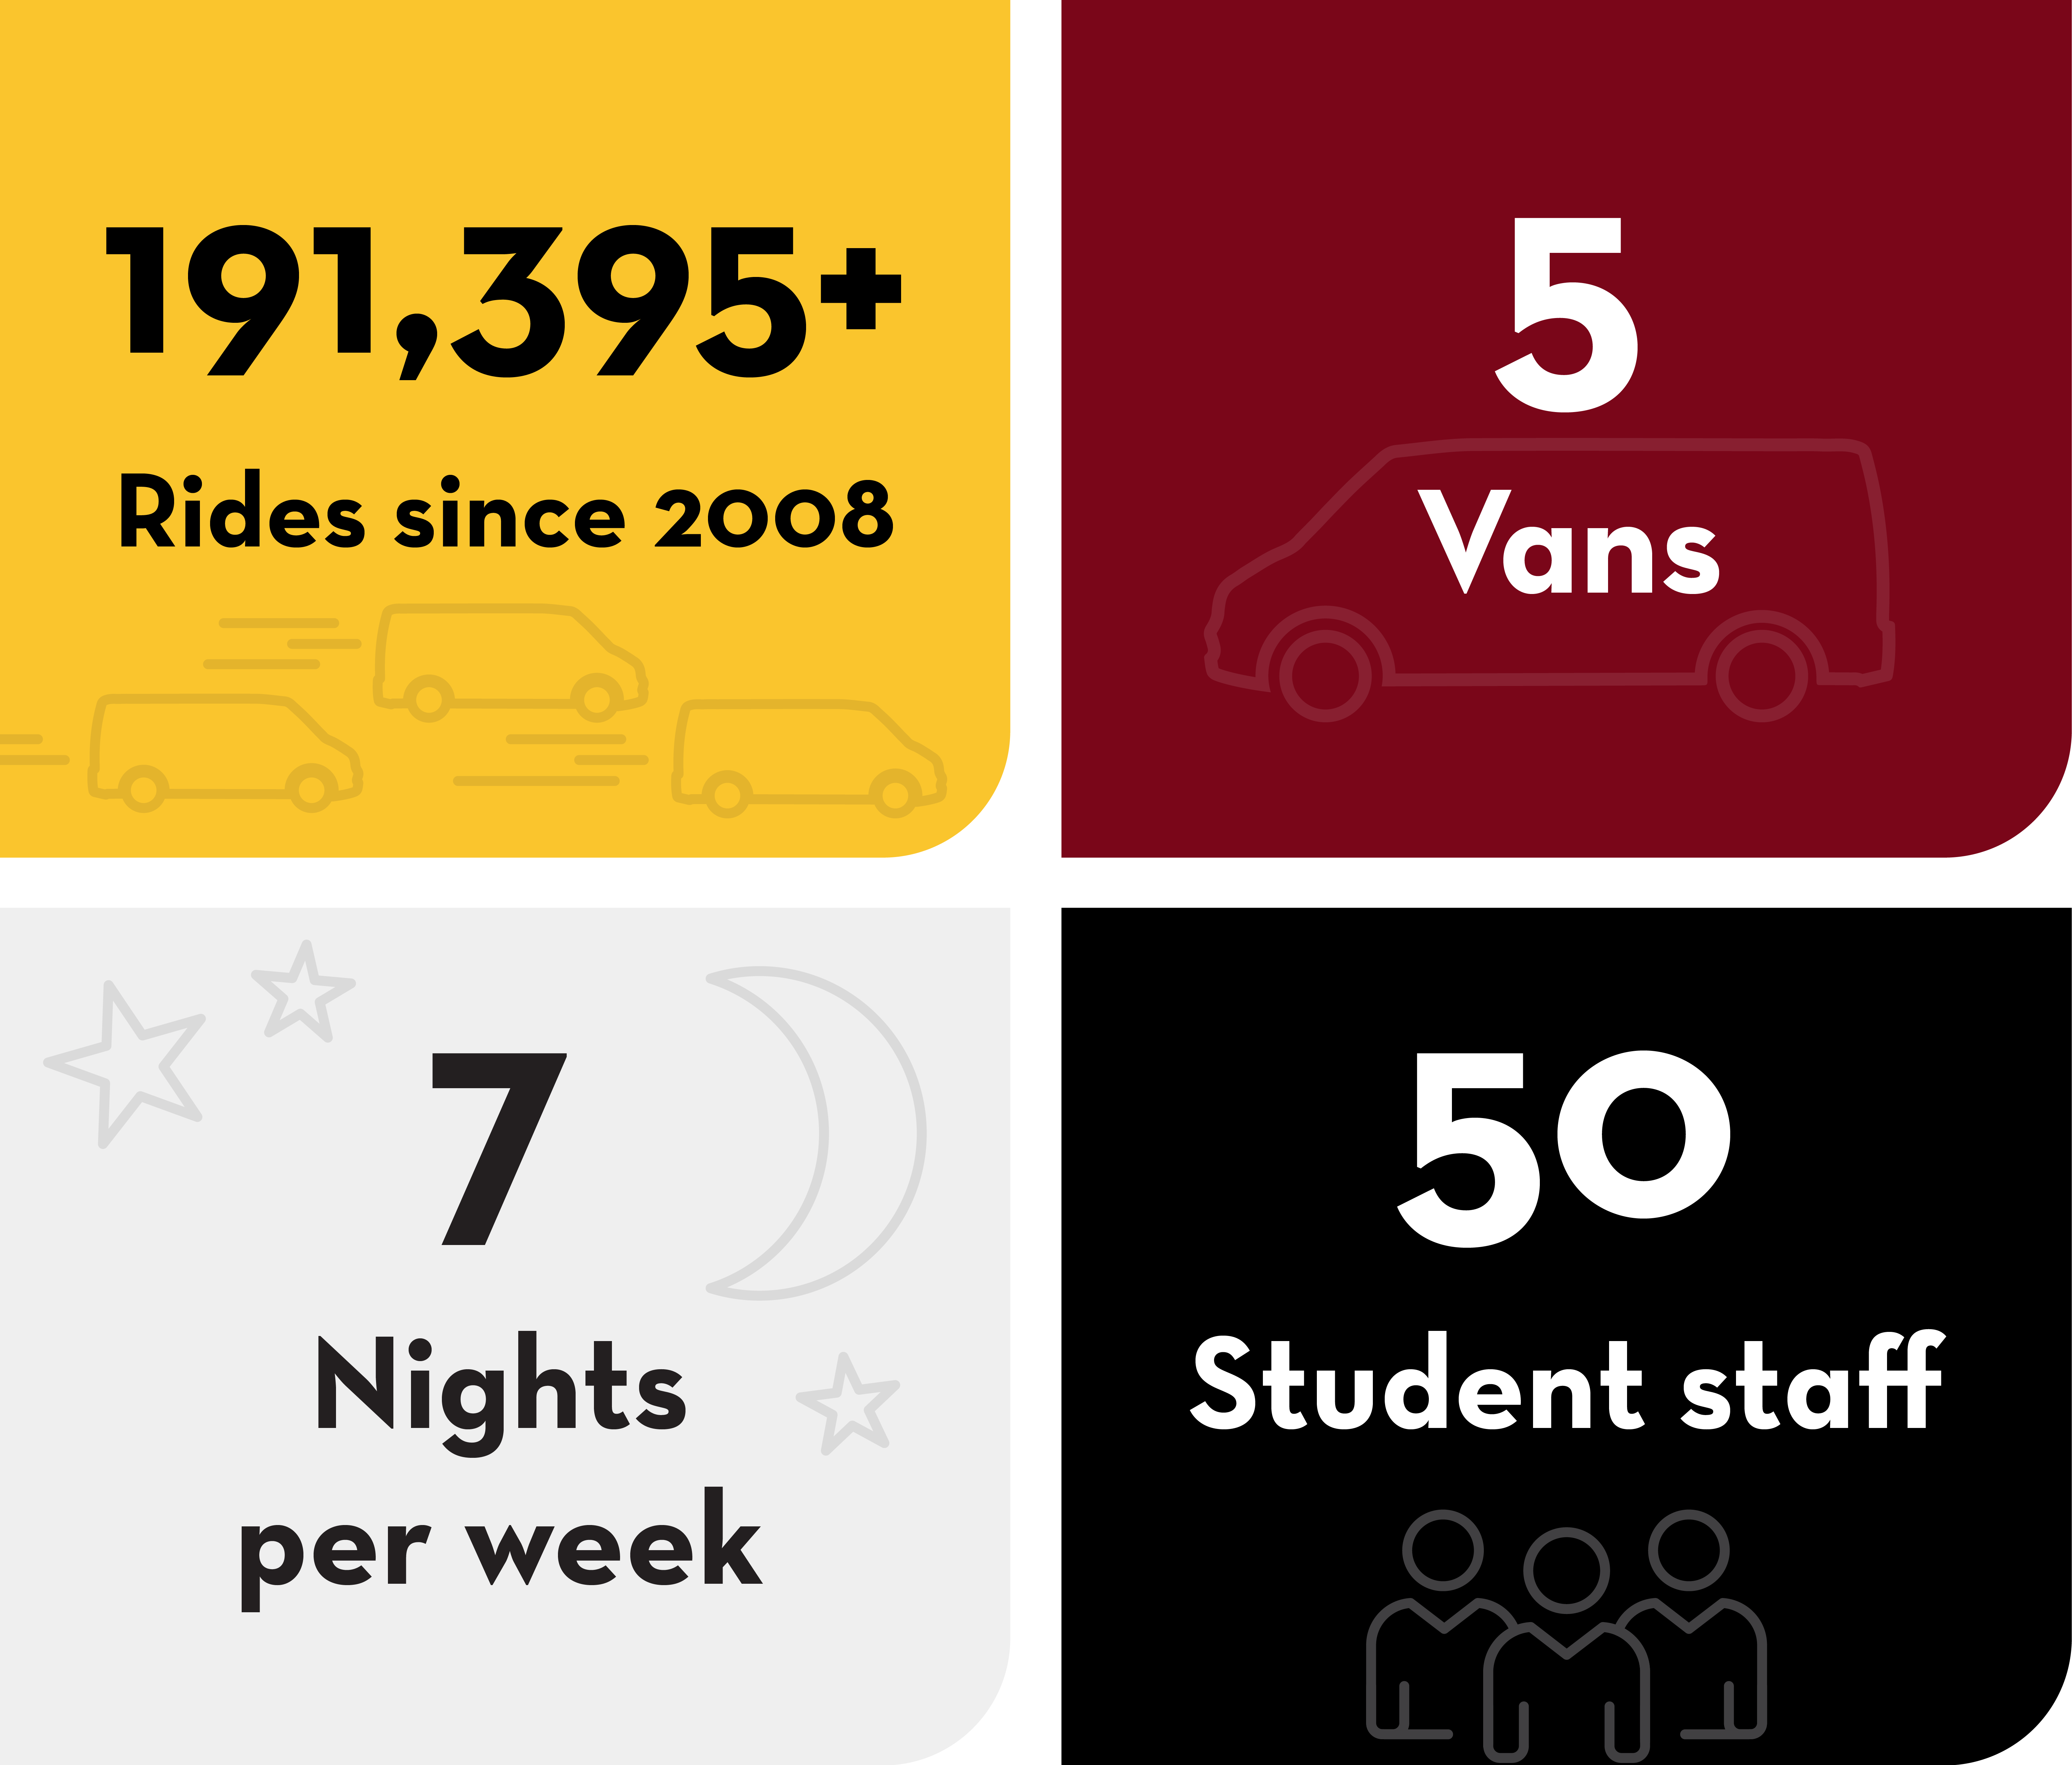 Gopher Chauffeur by the numbers: 191,395 rides since 2008, 5 vans, 7 nights per week, 50 student staff